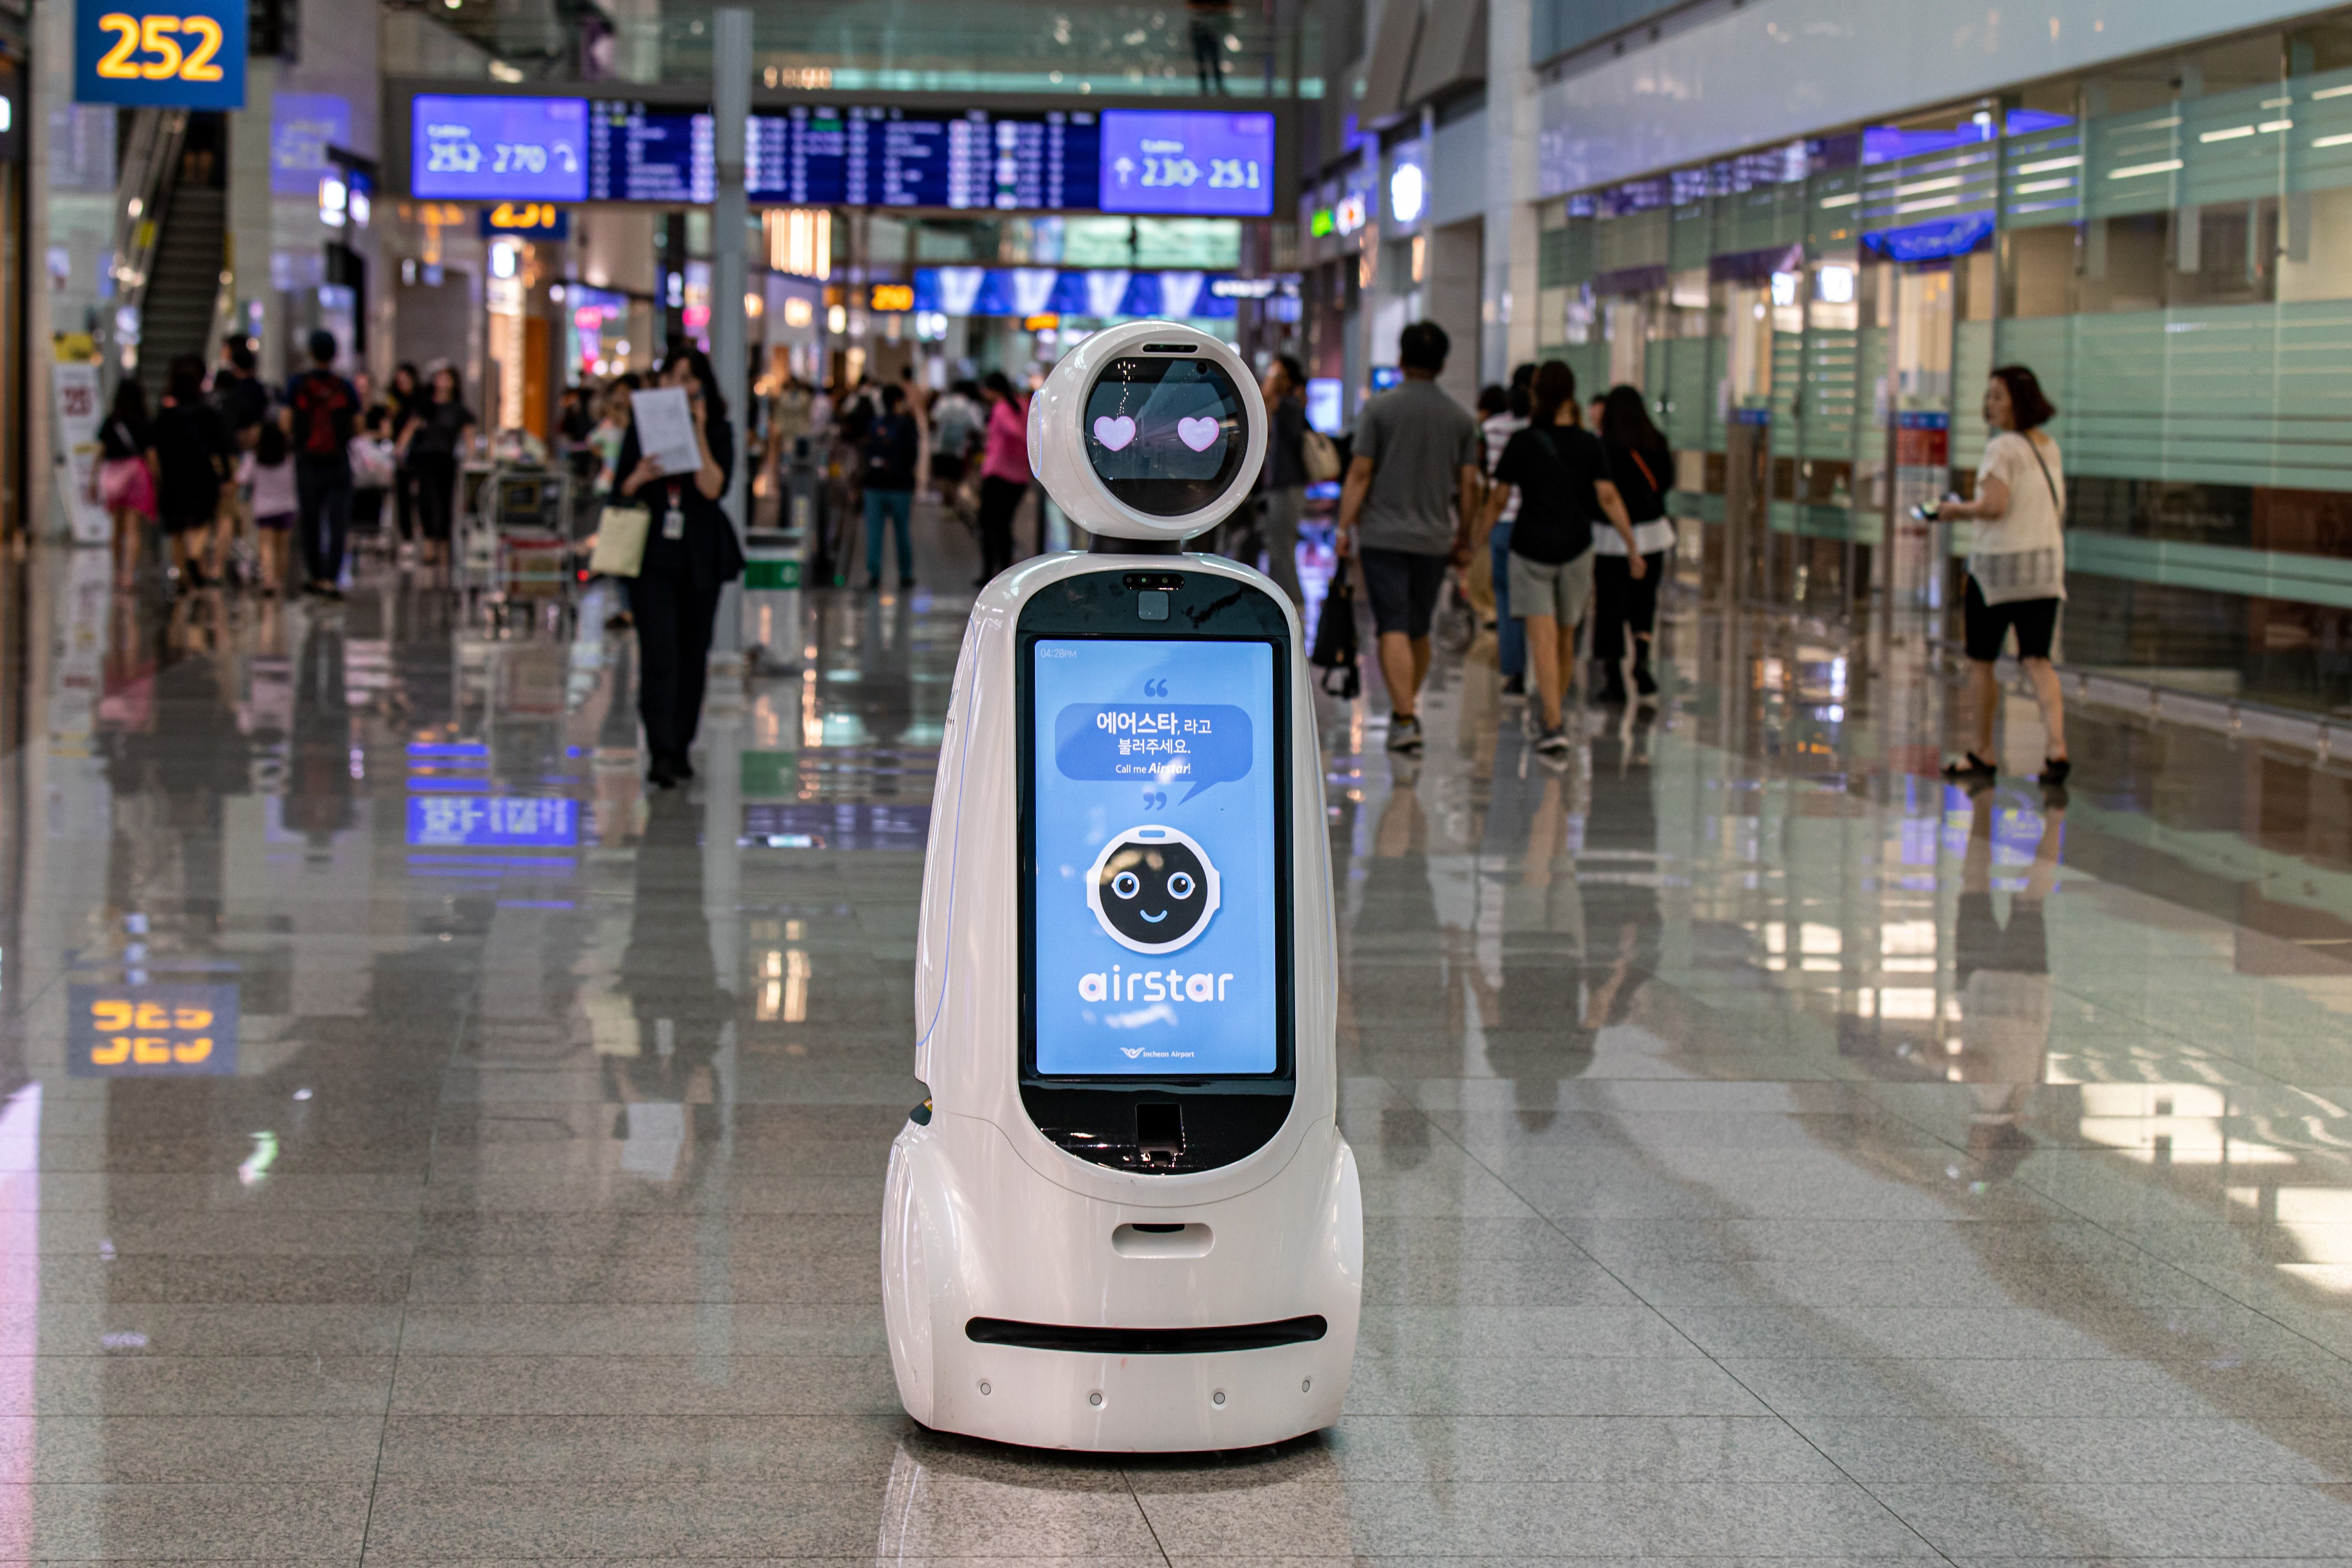 A Passenger aiding robot at Seoul Incheon Airport.